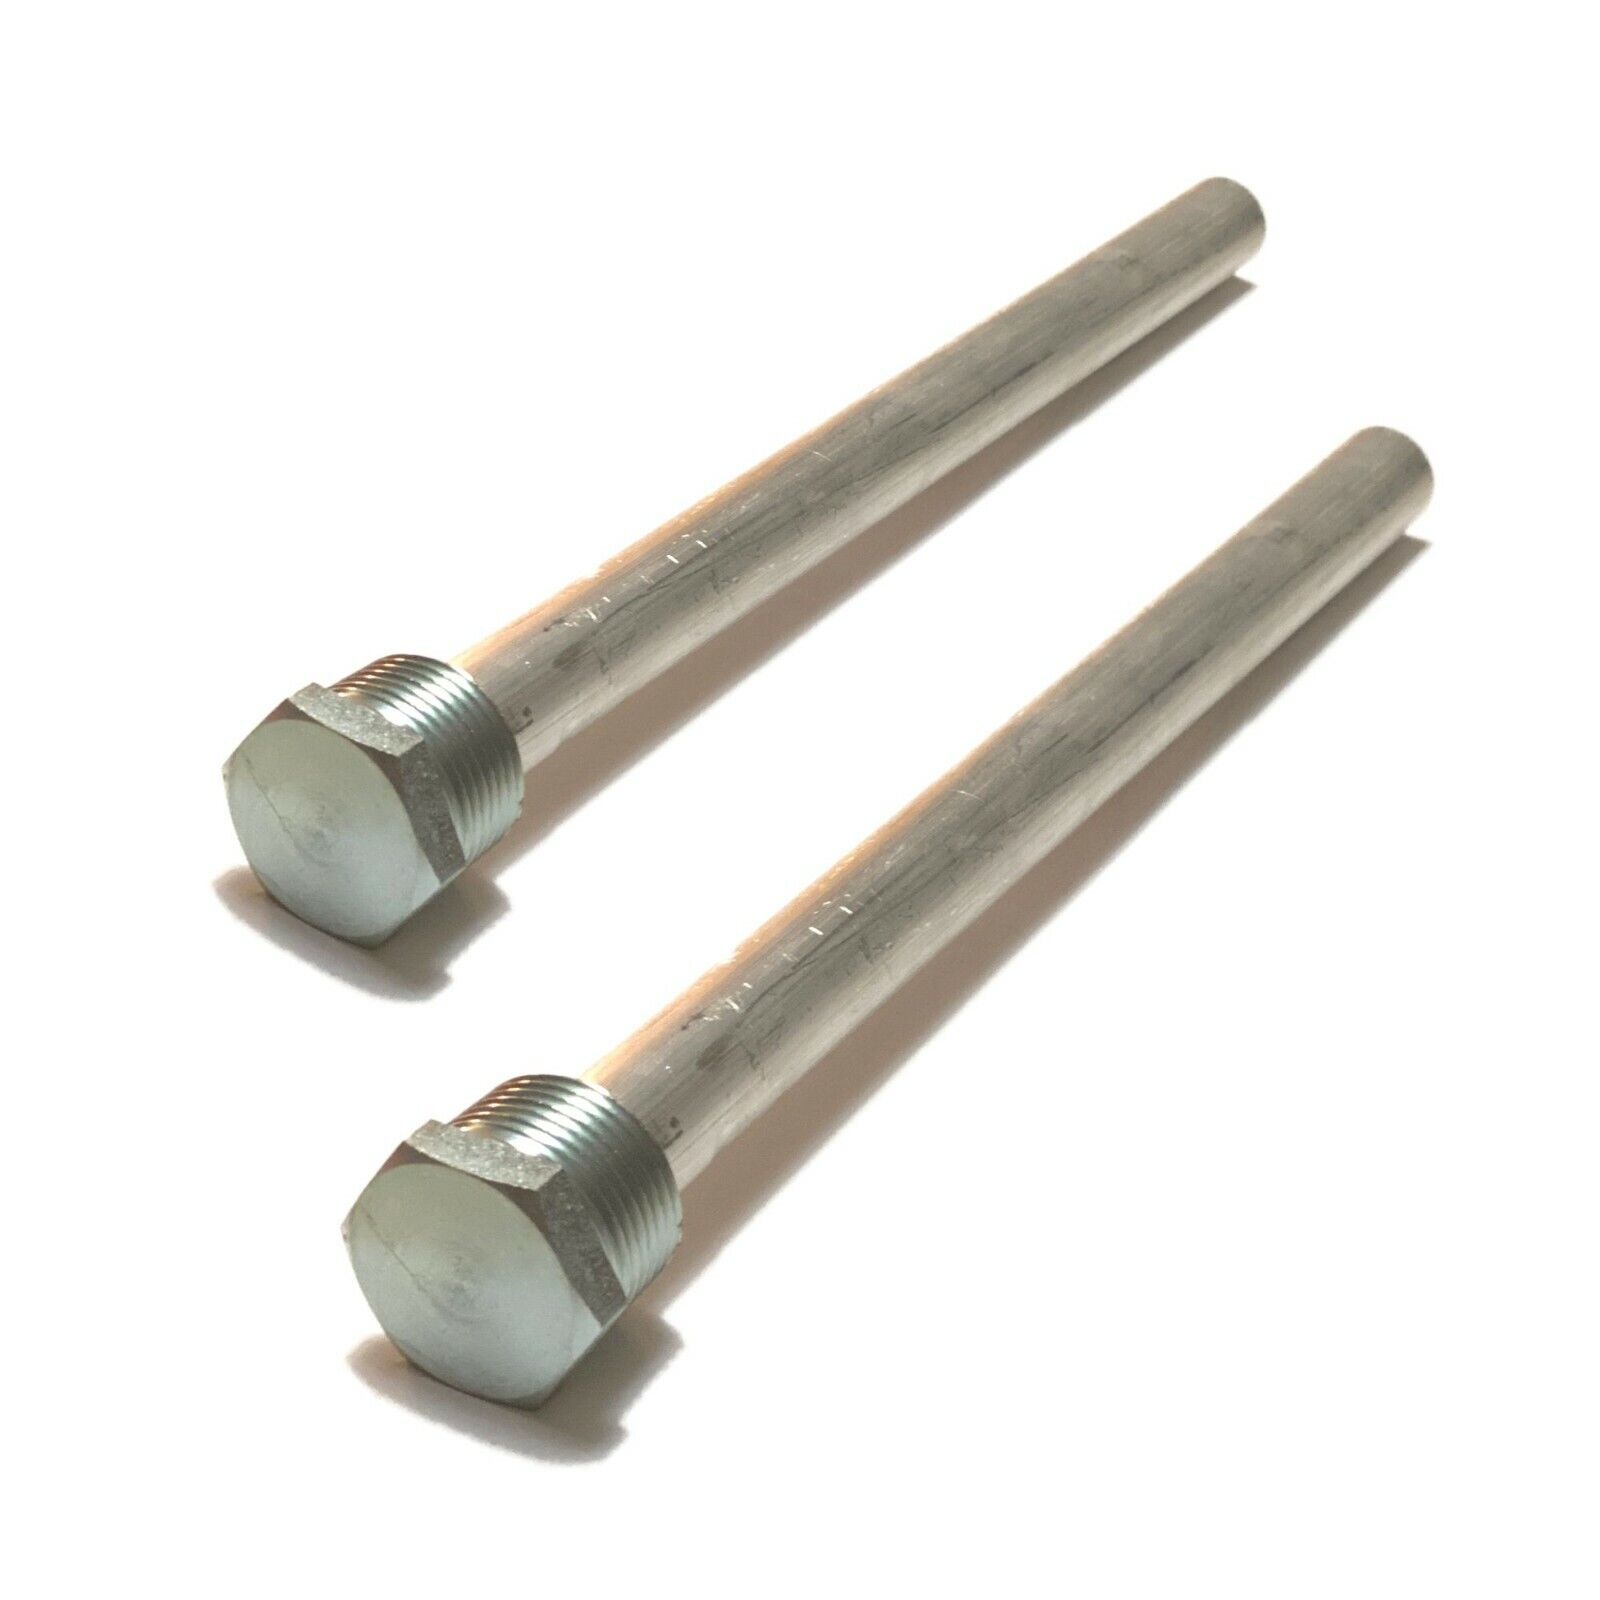 Suburban 232767 RV-Camper Water Heater Replacement Magnesium Anode Rod 2 PACK